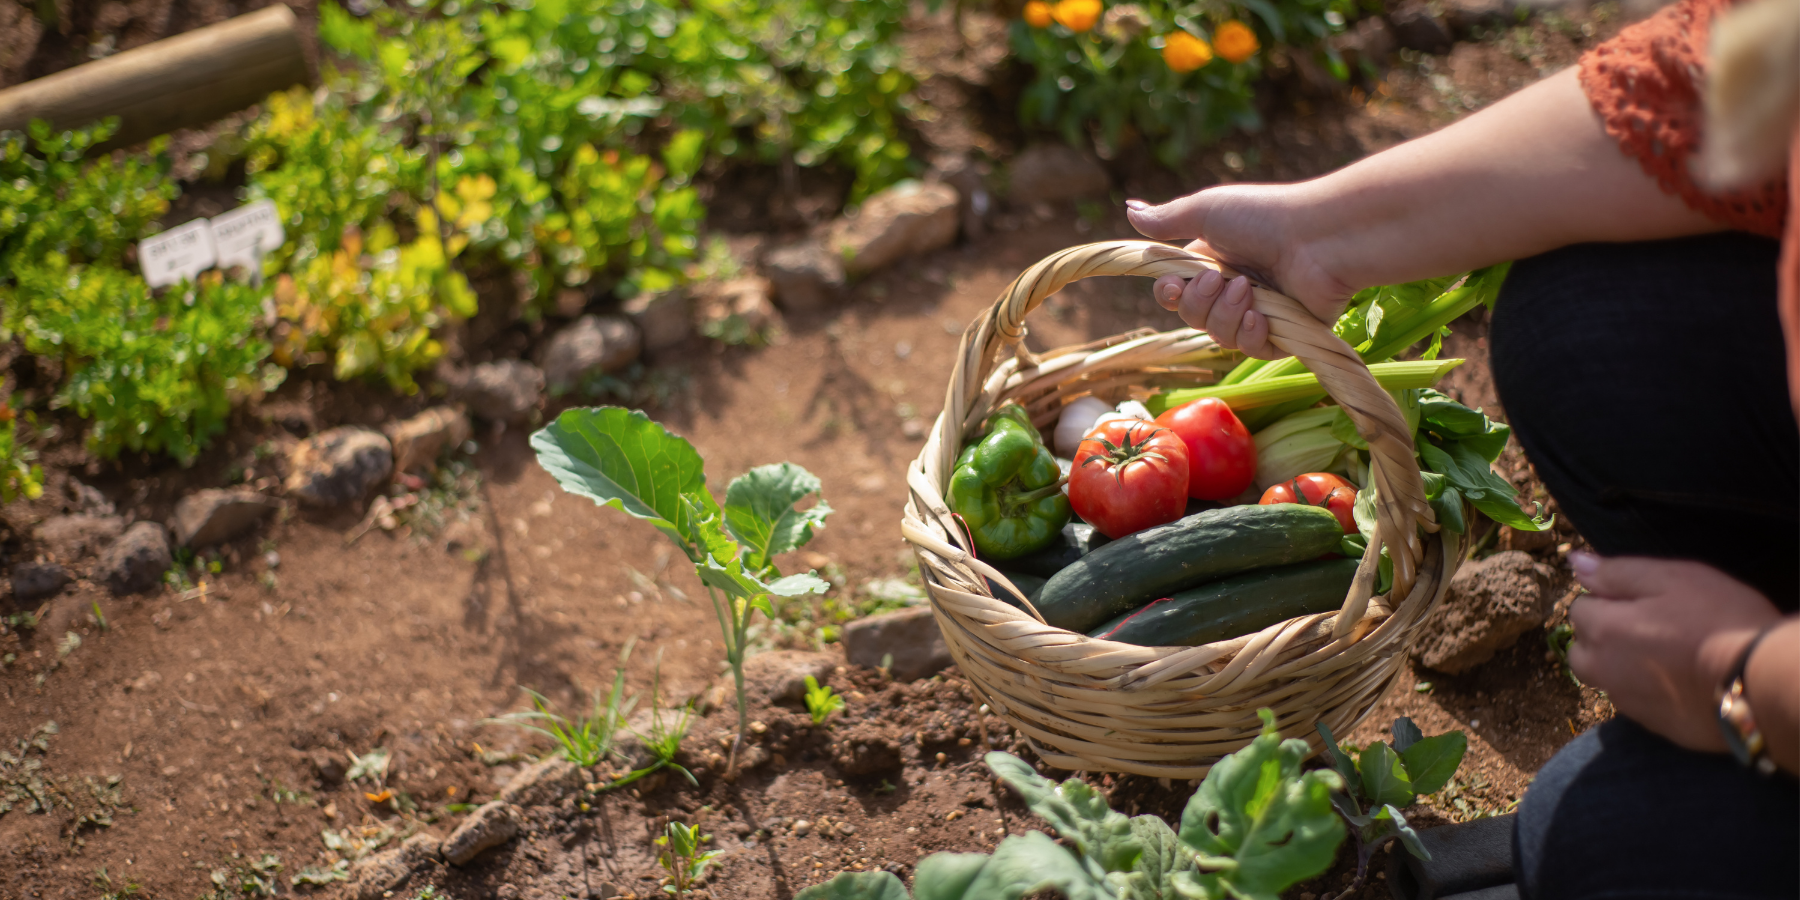 A arm holds a wicker basket filled with freshly picked red peppers, courgettes, and leafy greens over a vegetable garden.